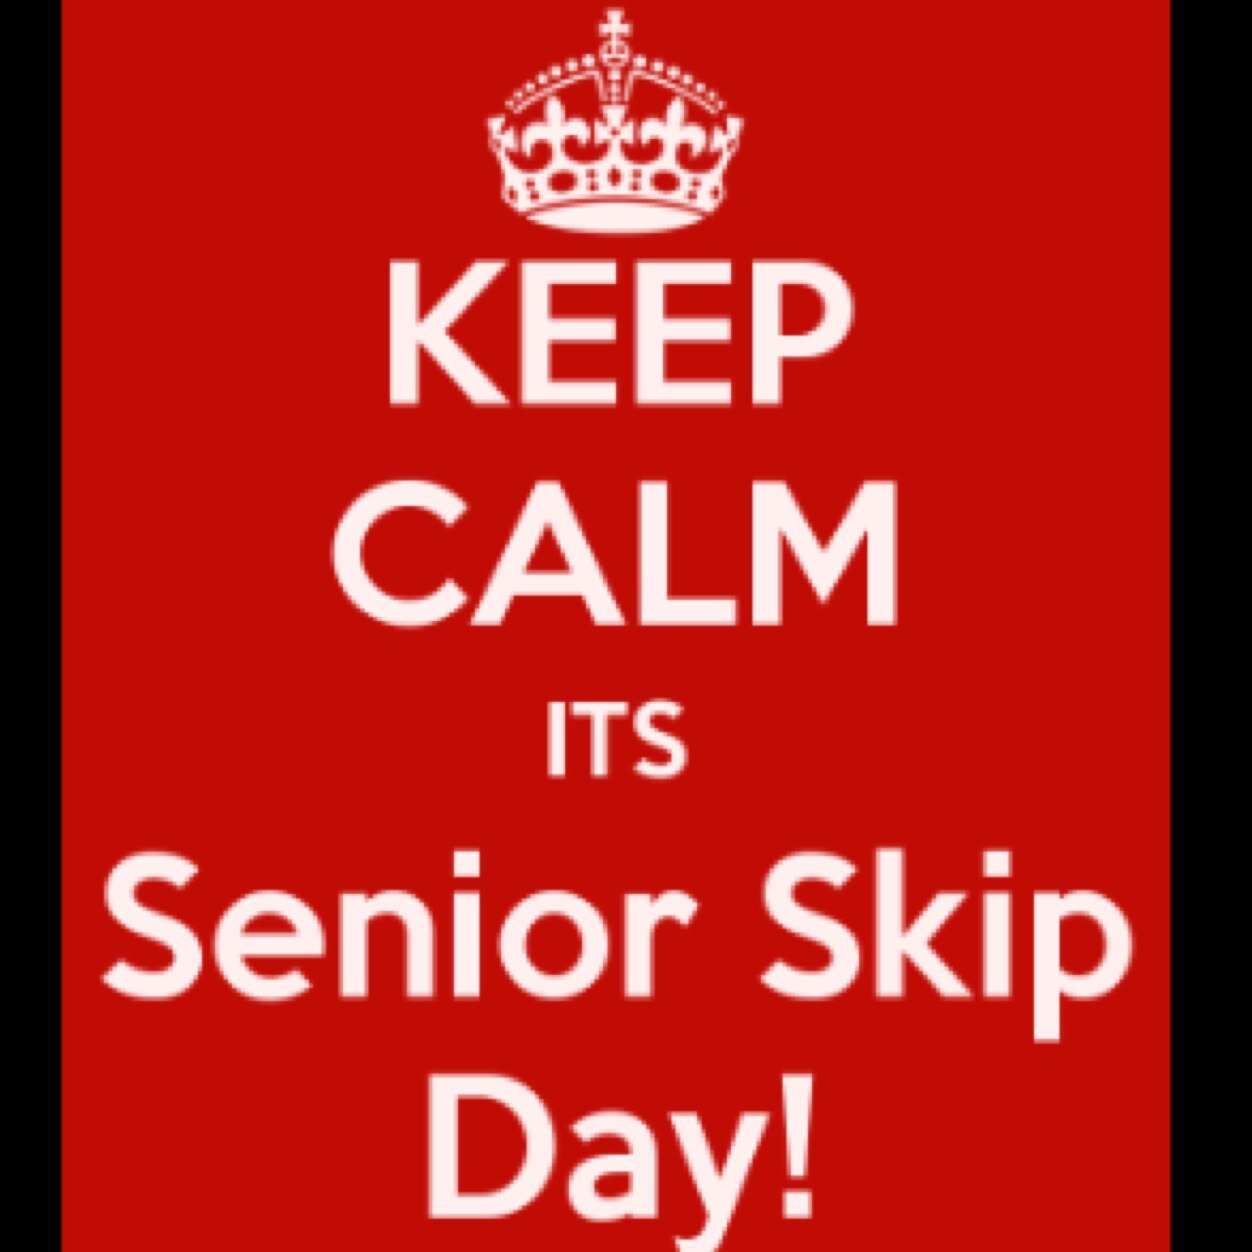 The Twitter handle for Palmetto High Schools Senior Skip Day held at the Williamston Mineral Spring Park on May 2 @ 3pm-9pm